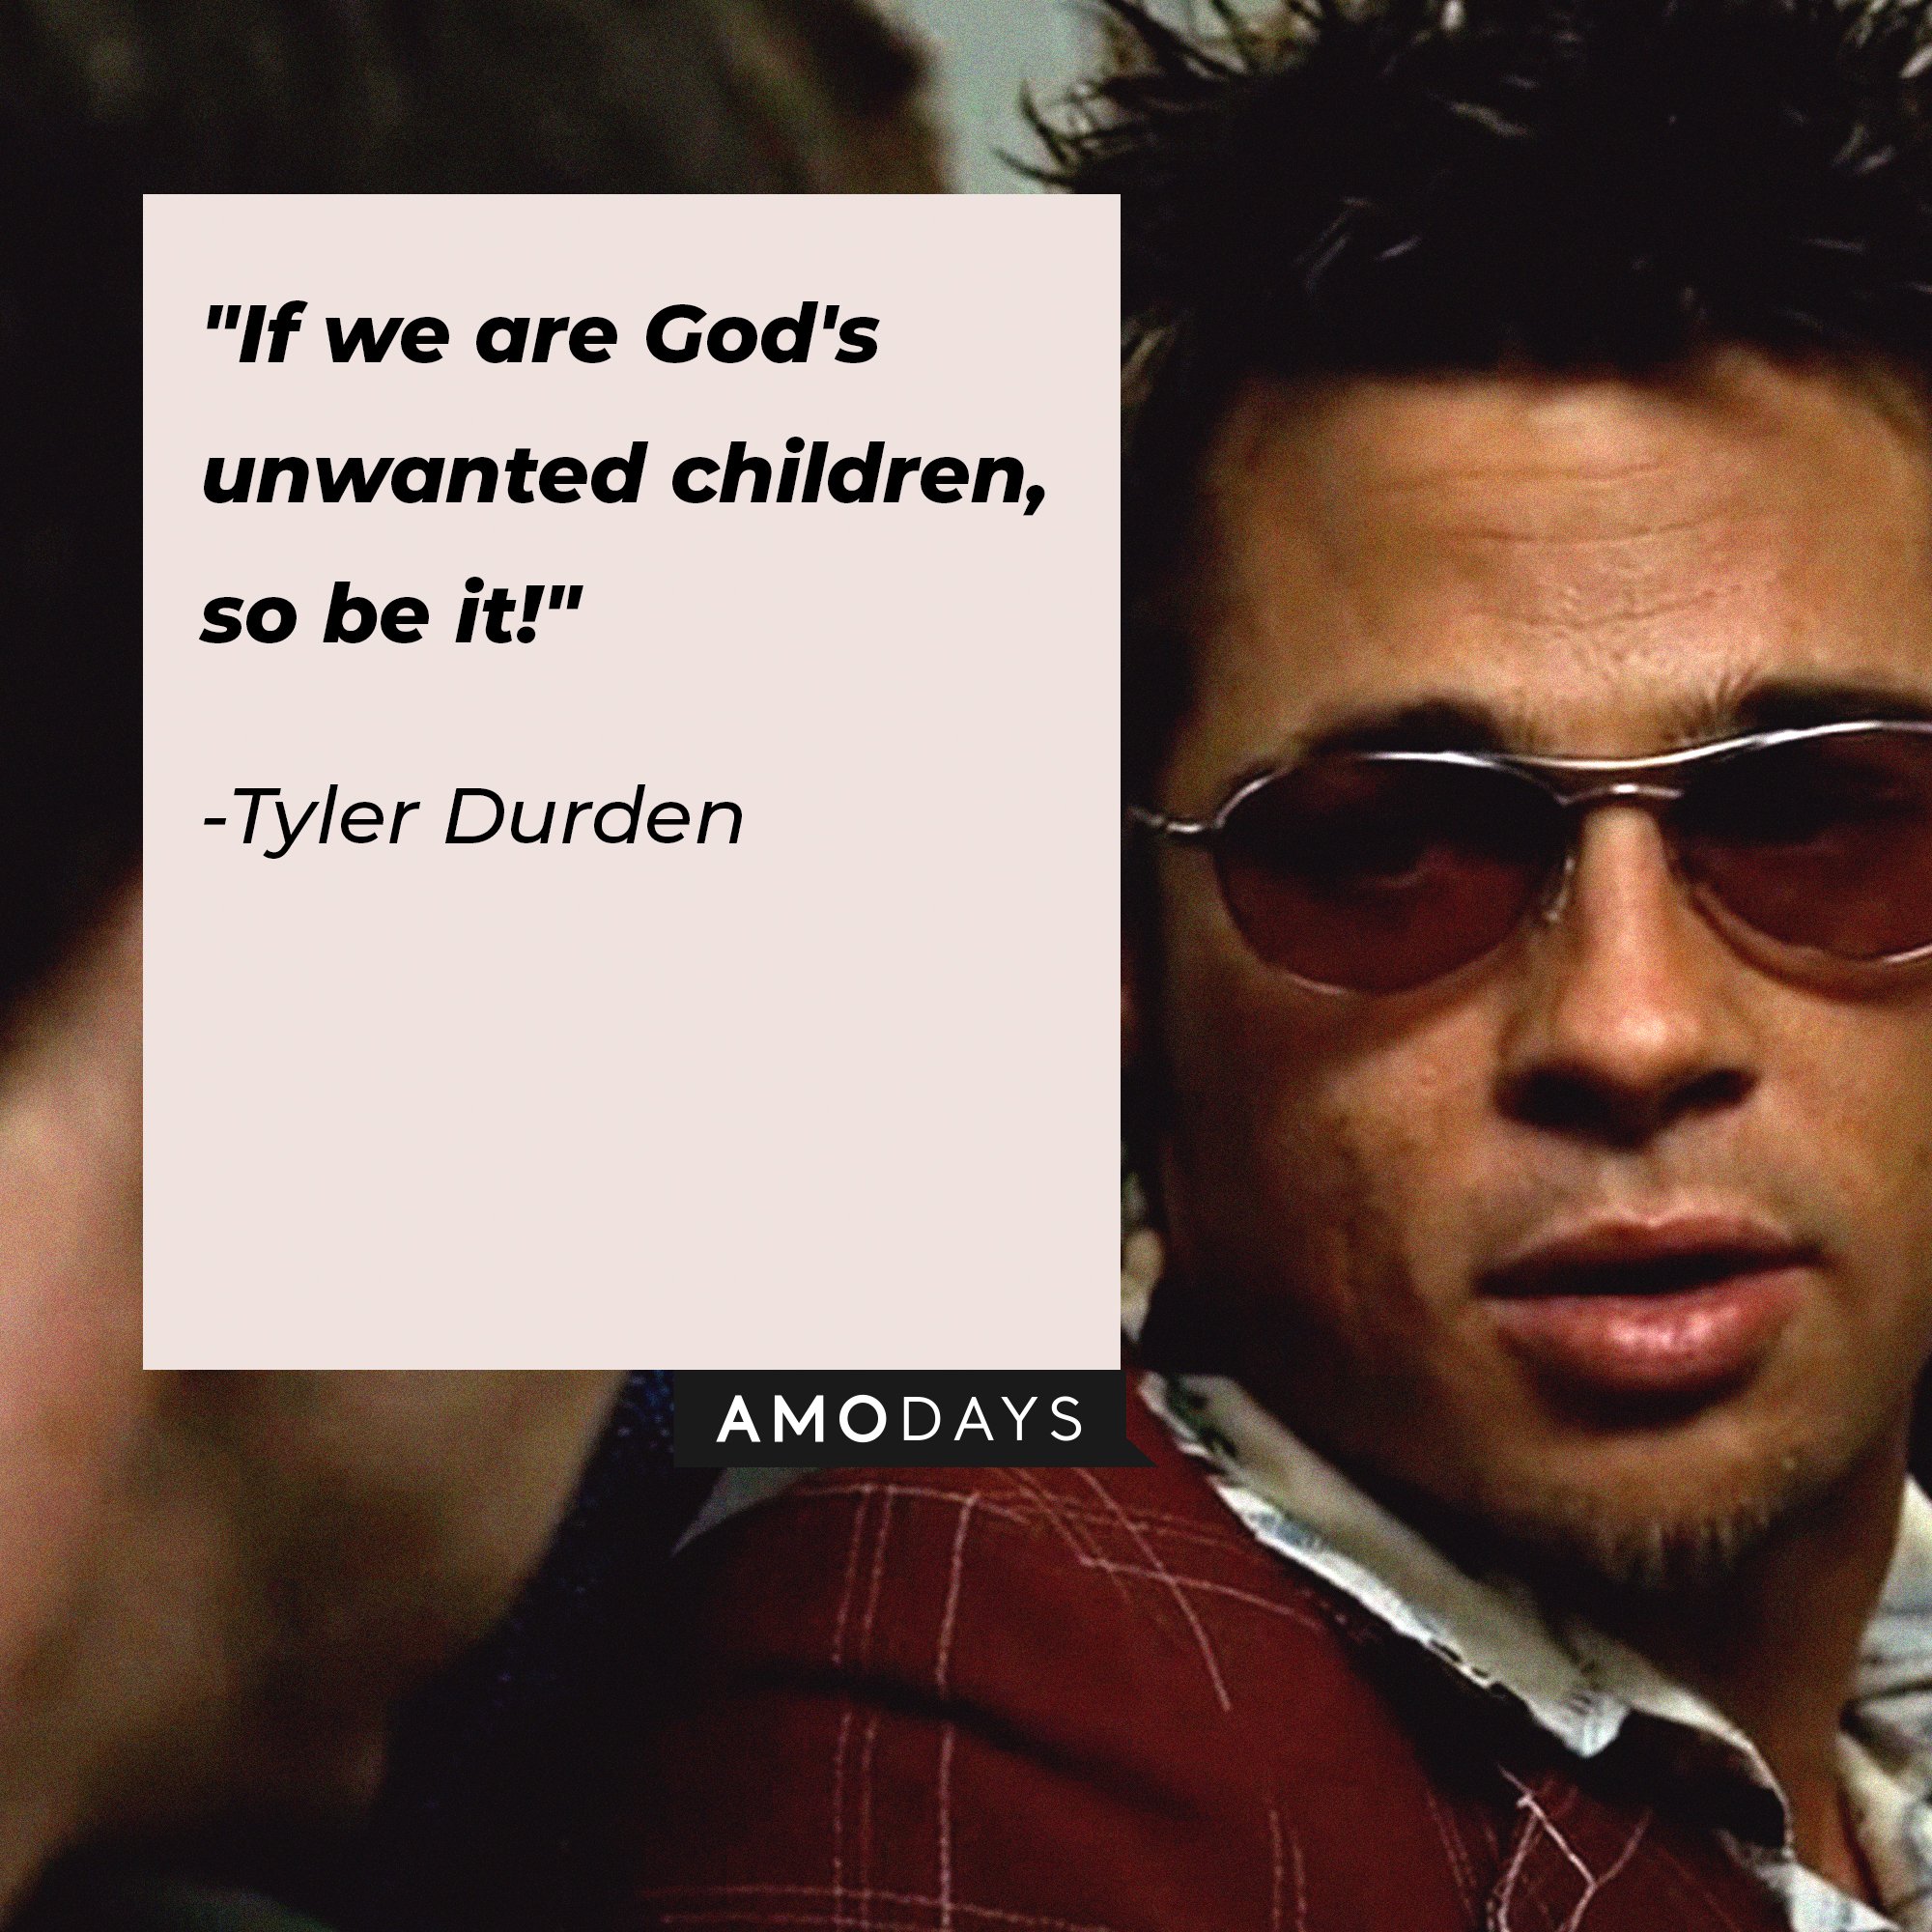 Tyler Durden's quote: "If we are God's unwanted children, so be it!" | Image: AmoDays